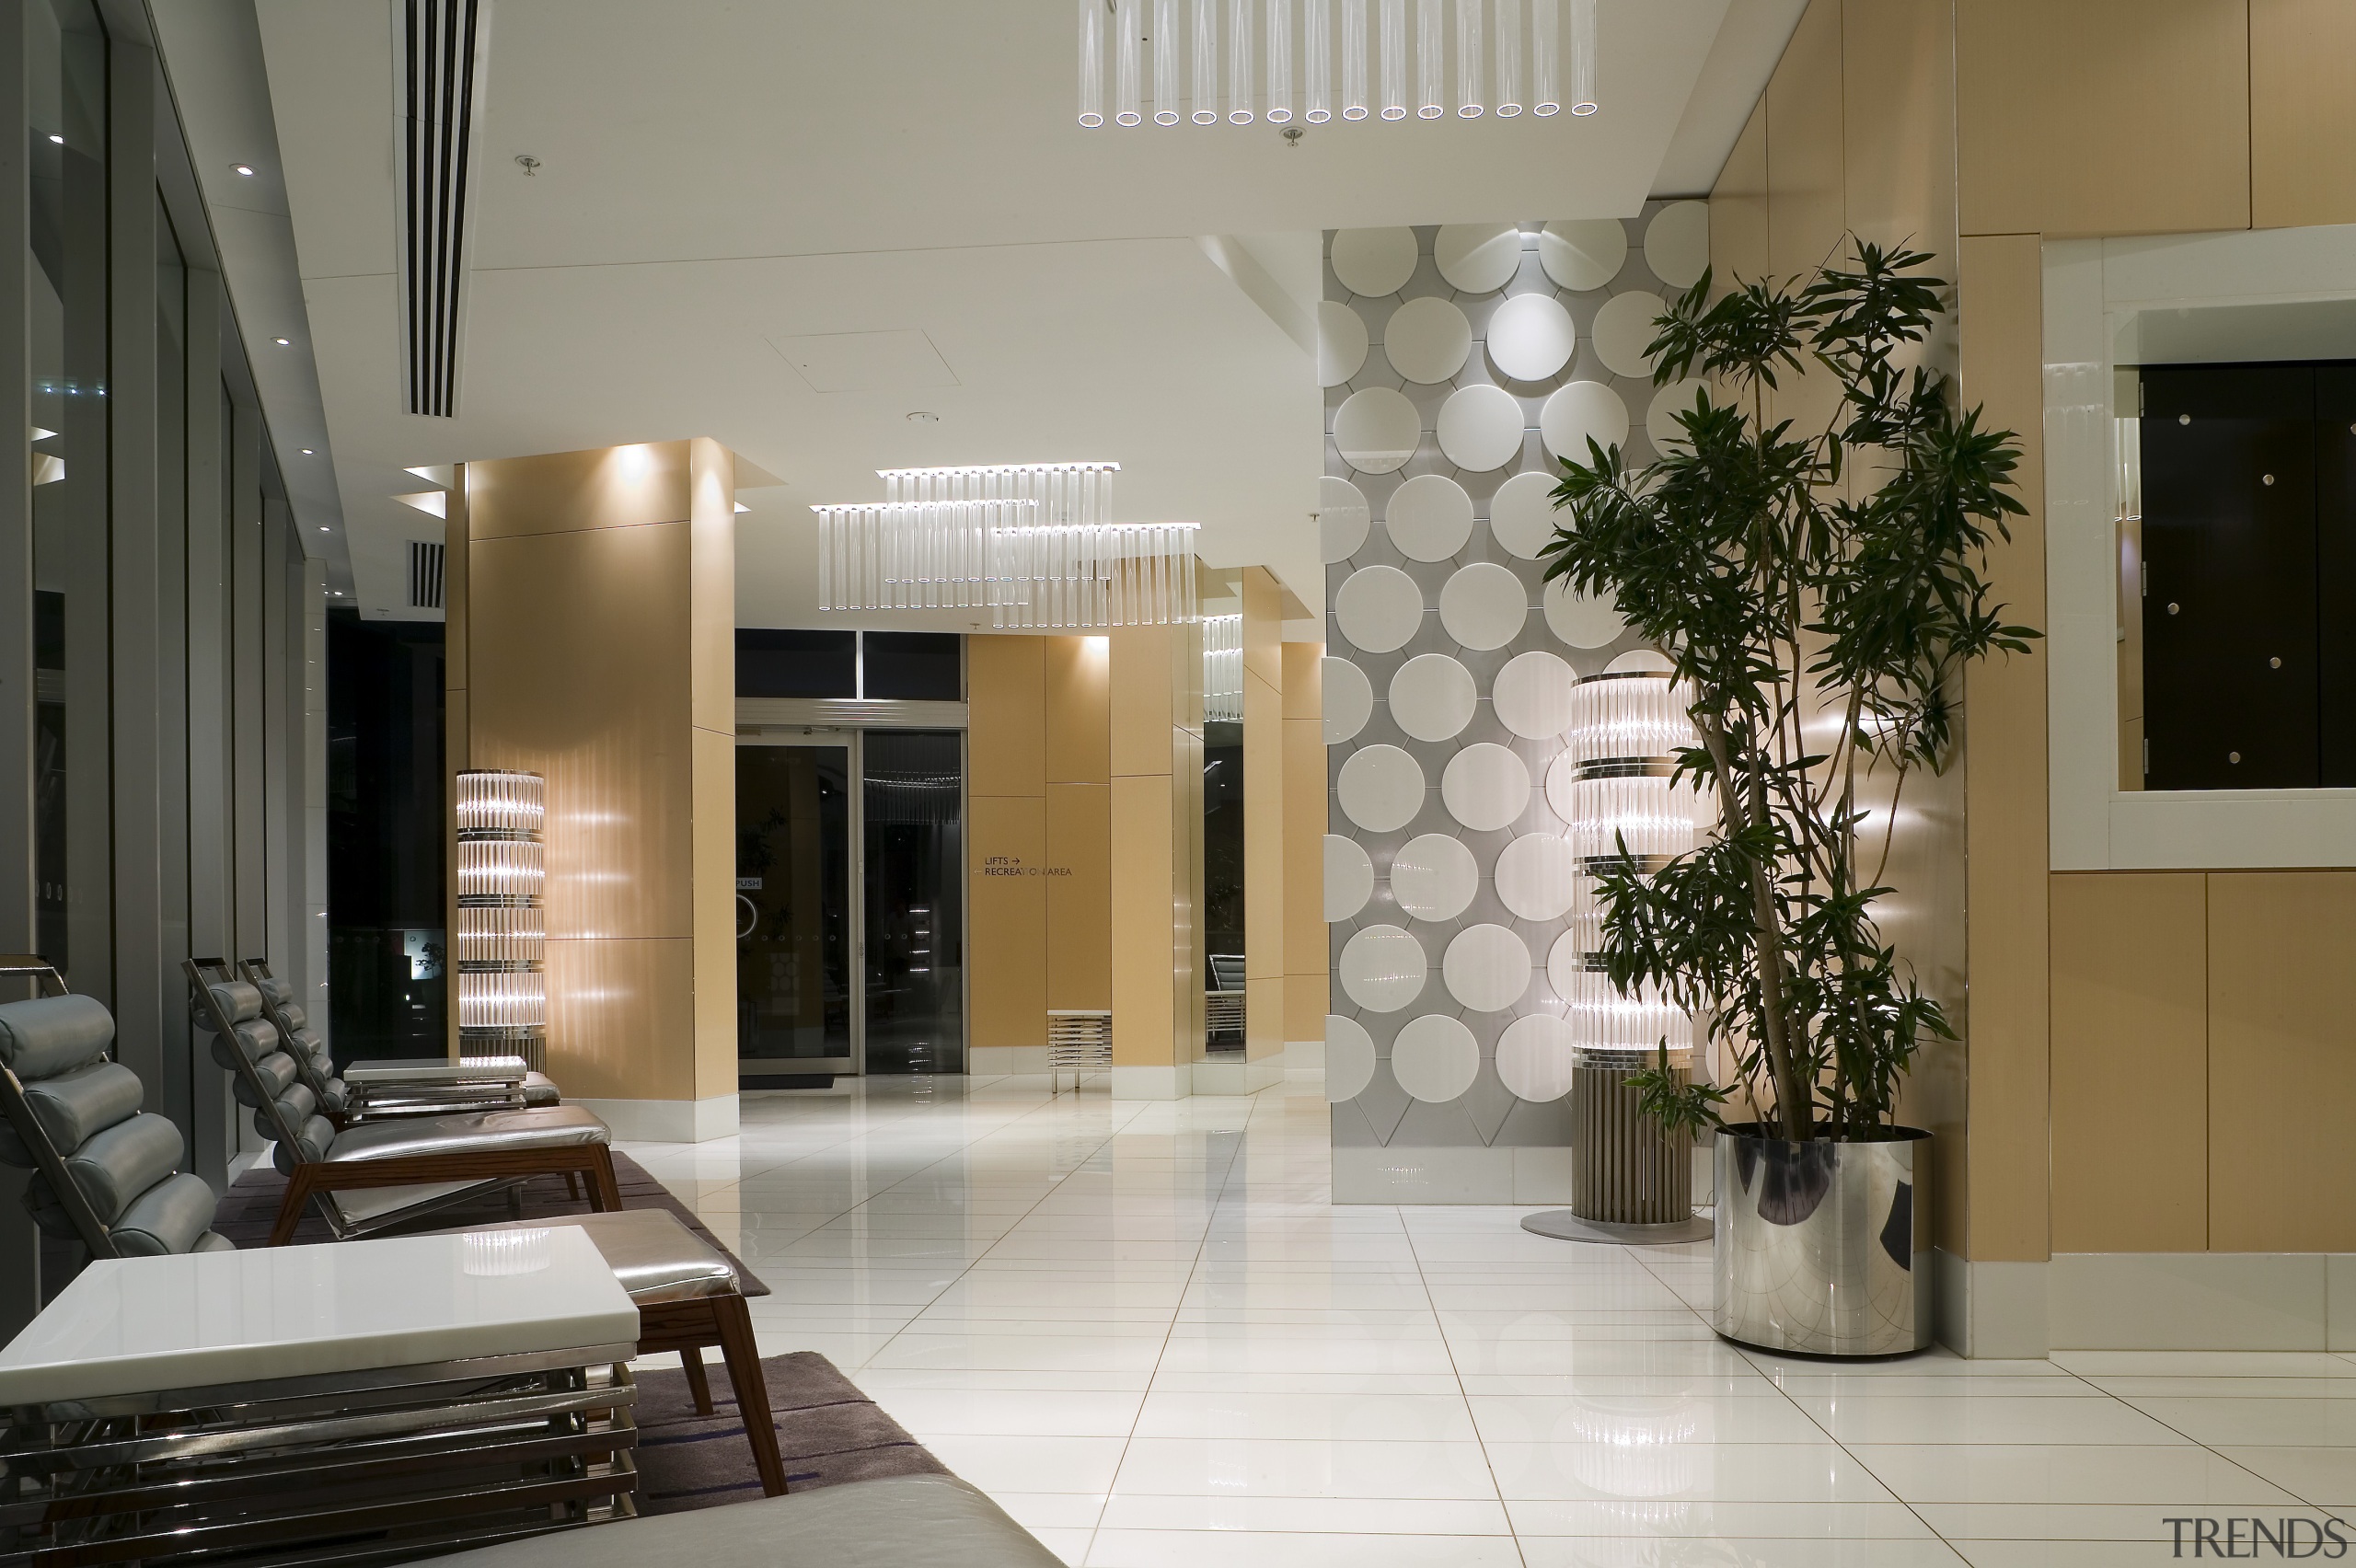 A view of the lobby of the Artique floor, flooring, interior design, living room, lobby, gray